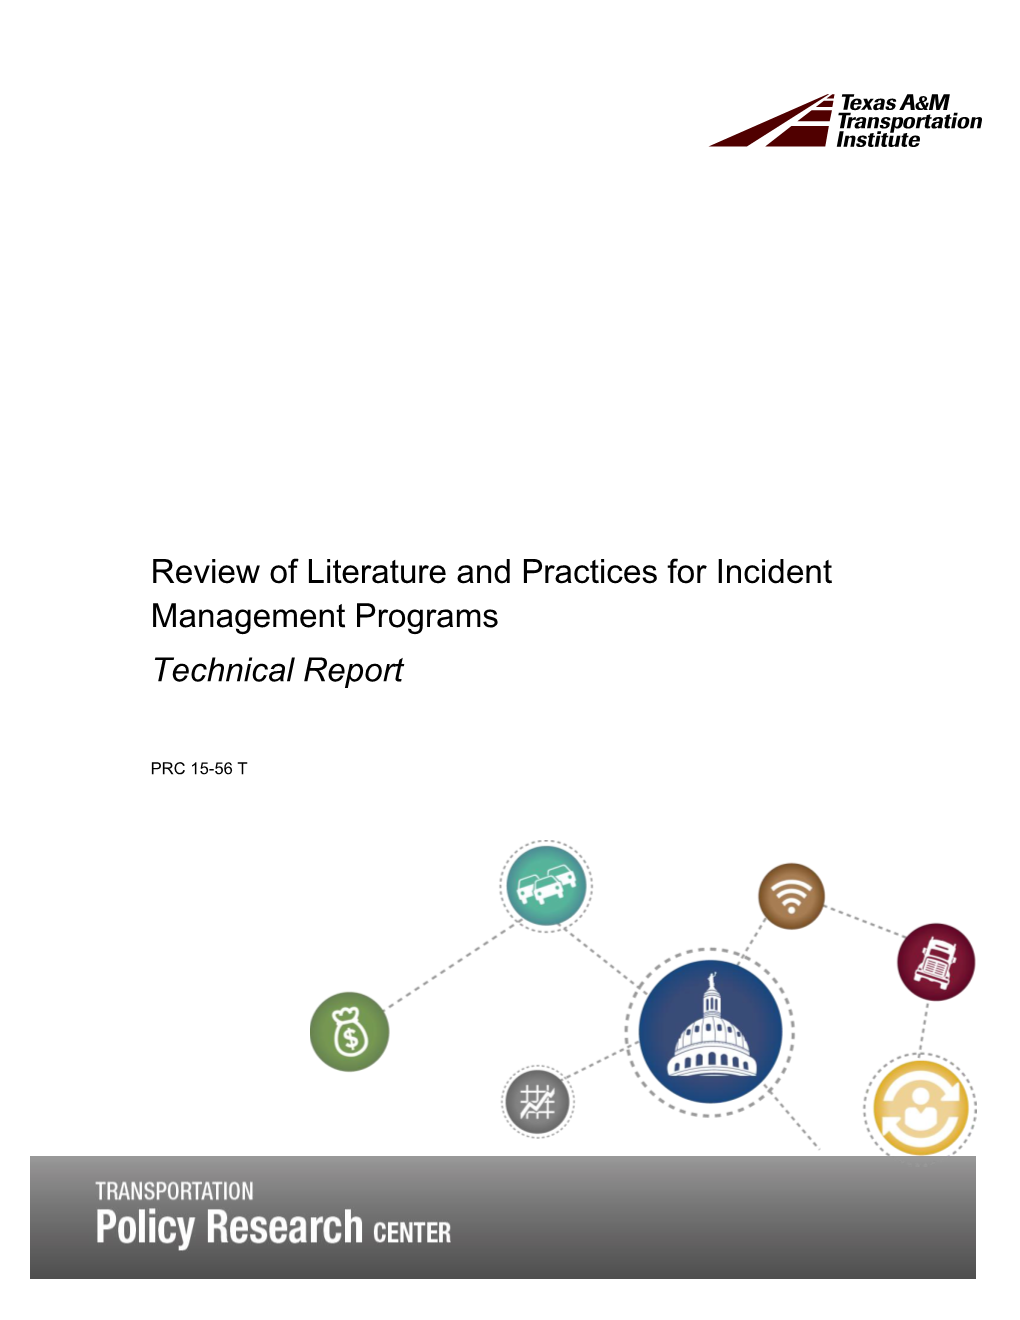 Review of Literature and Practices for Incident Management Programs Technical Report